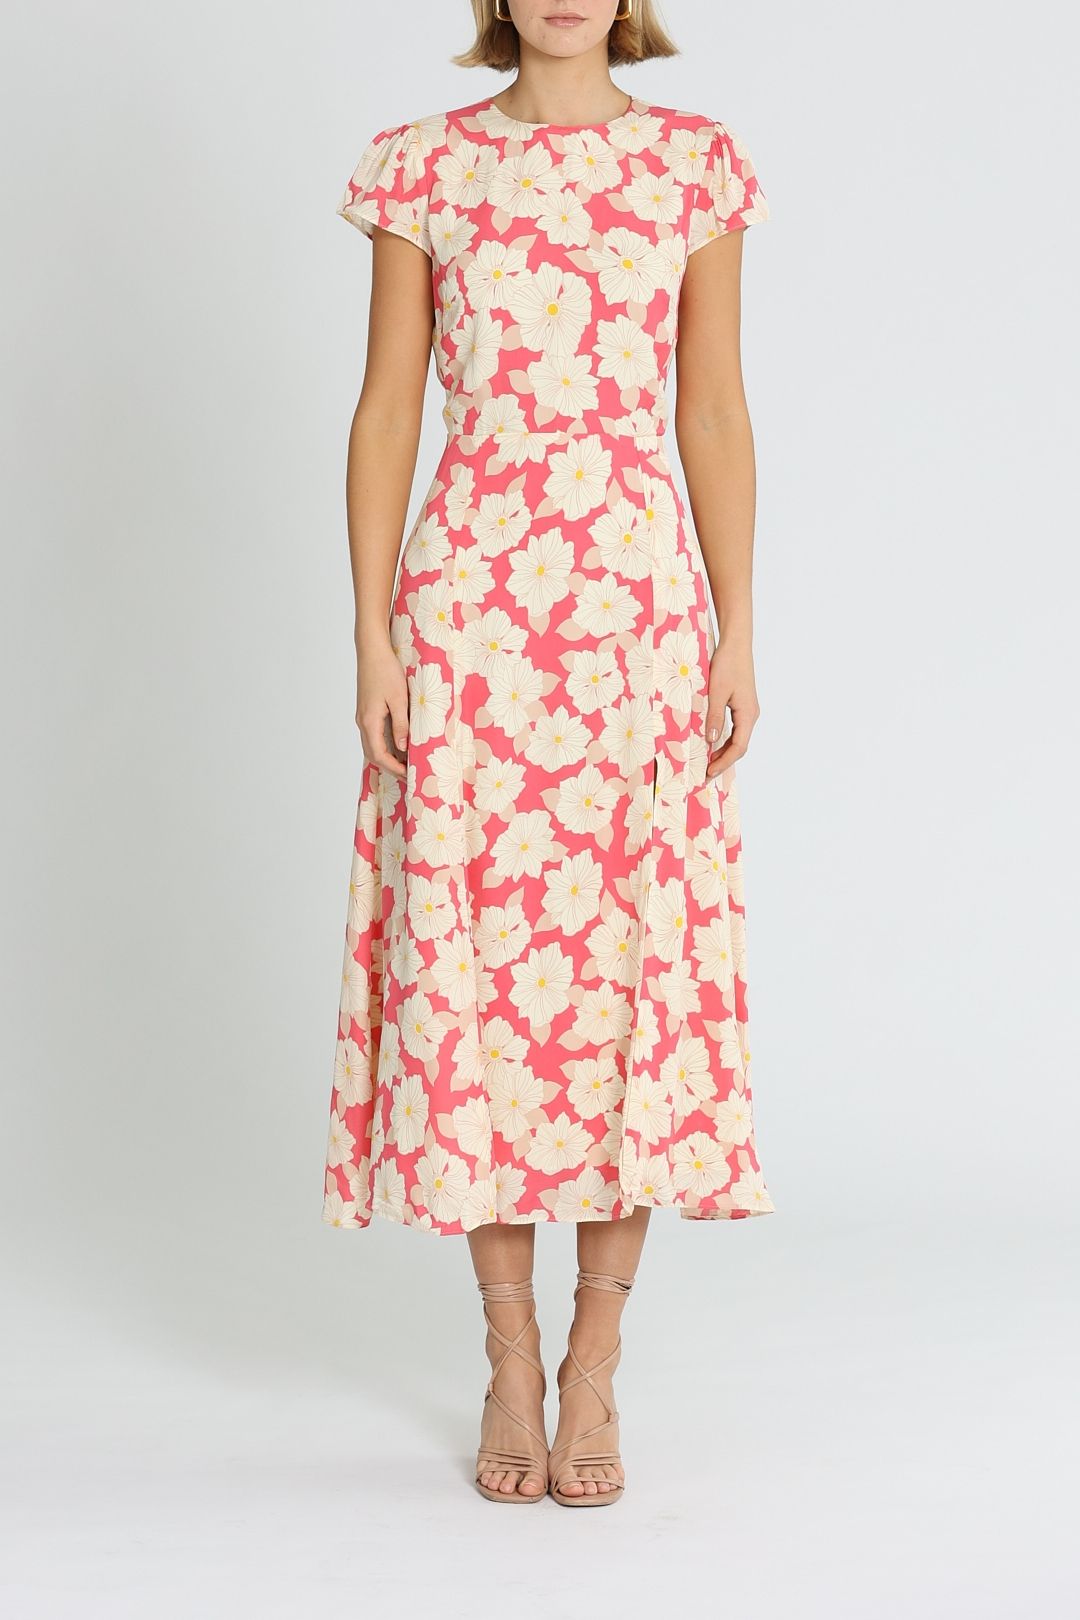 Reiss Printed Cut Out Midi Dress Floral